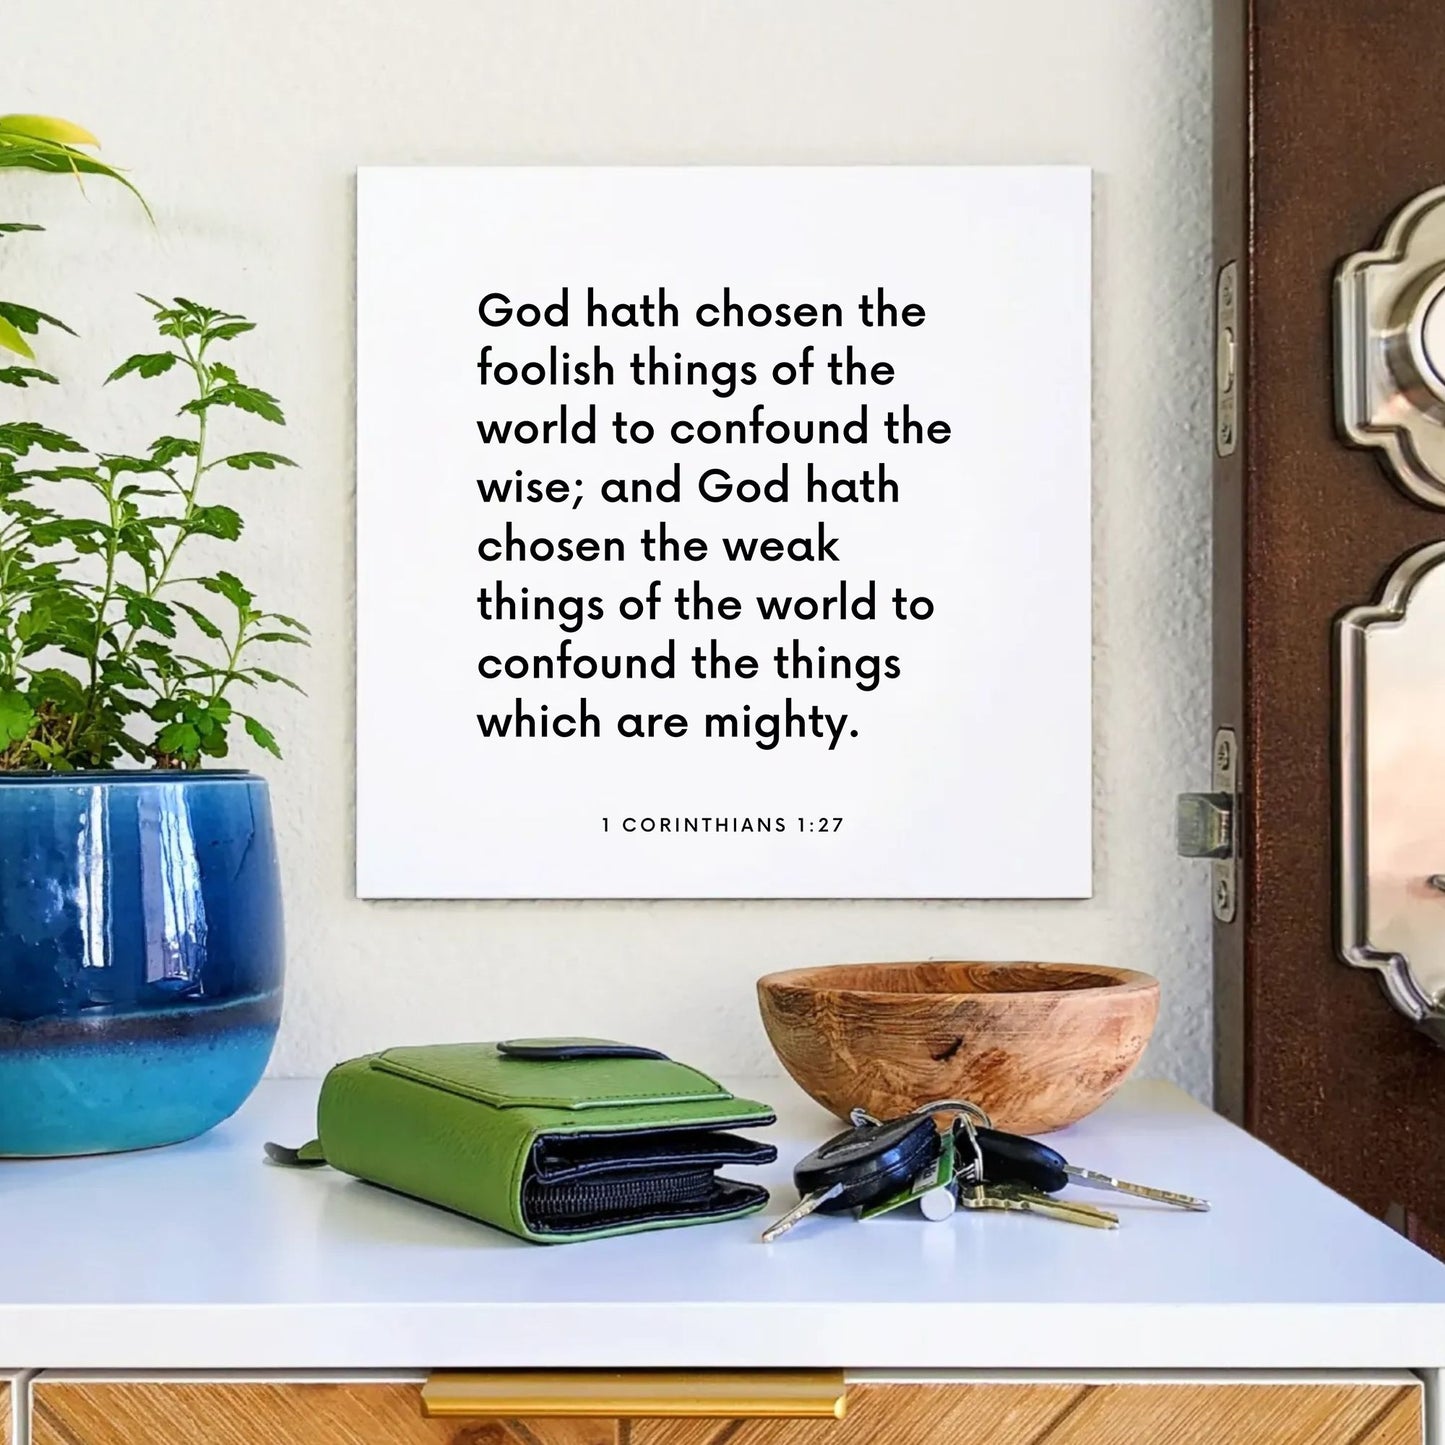 Entryway mouting of the scripture tile for 1 Corinthians 1:27 - "God hath chosen the foolish things of the world"